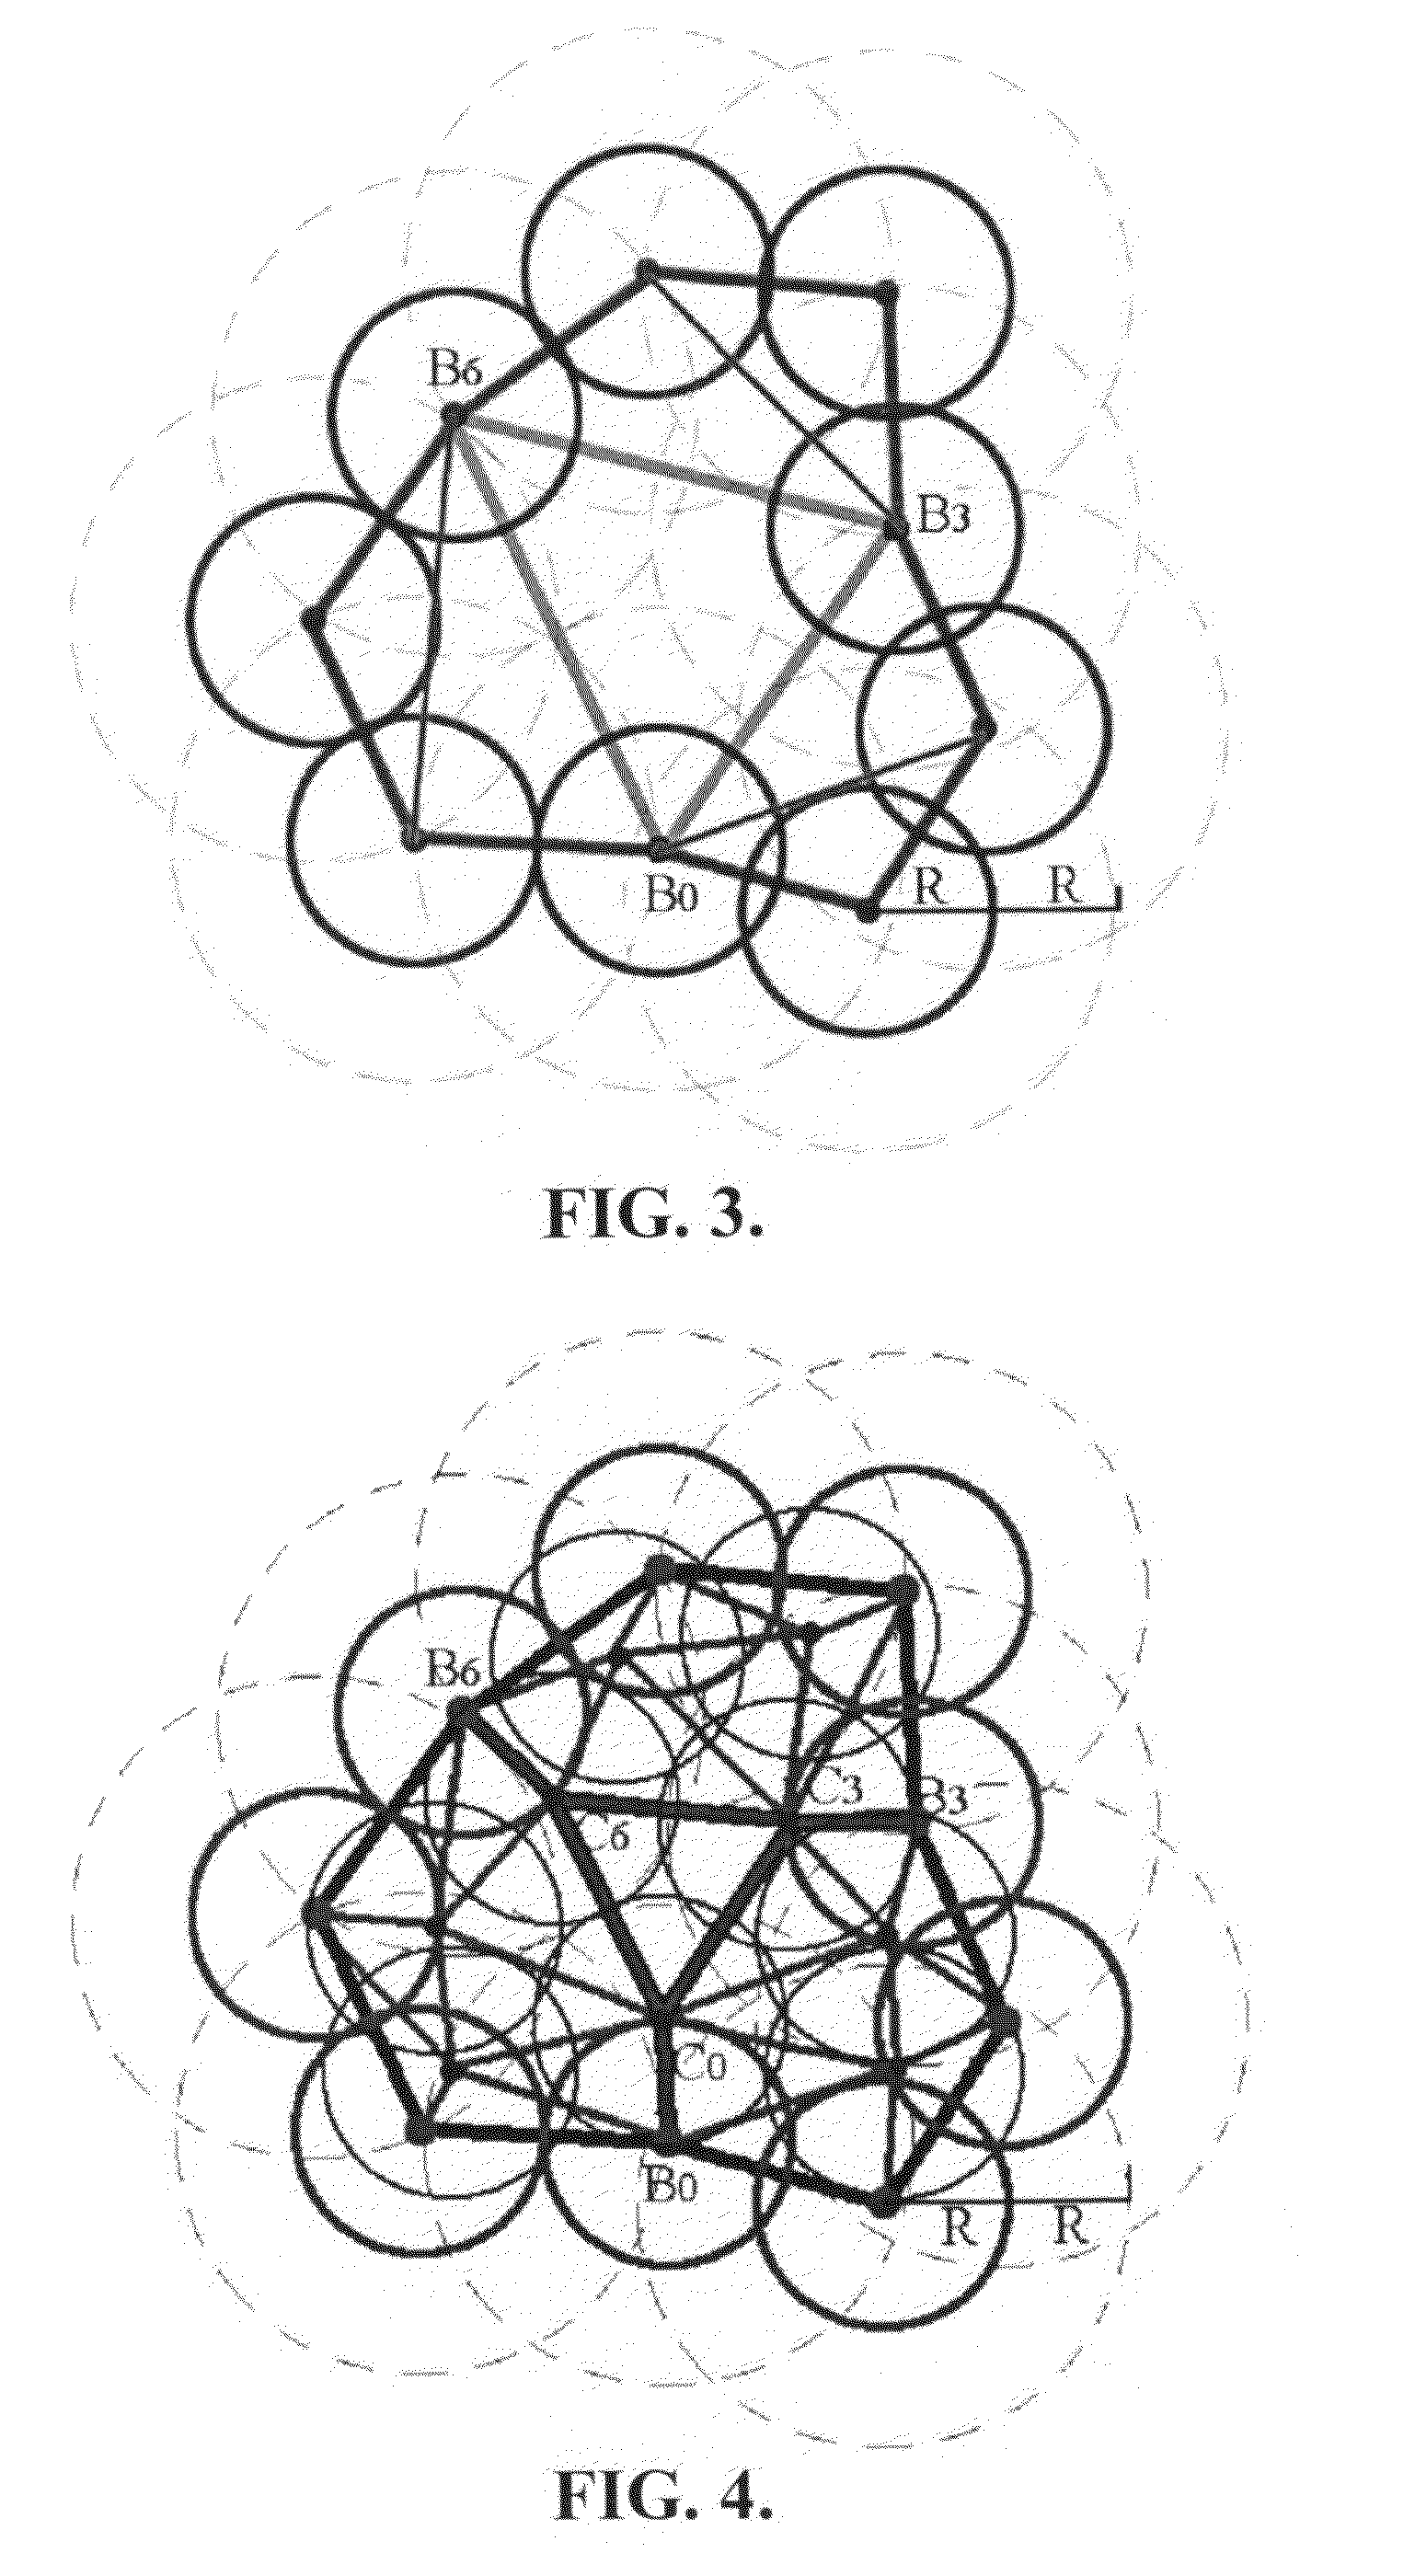 Distributed hole recovery process using connectivity information